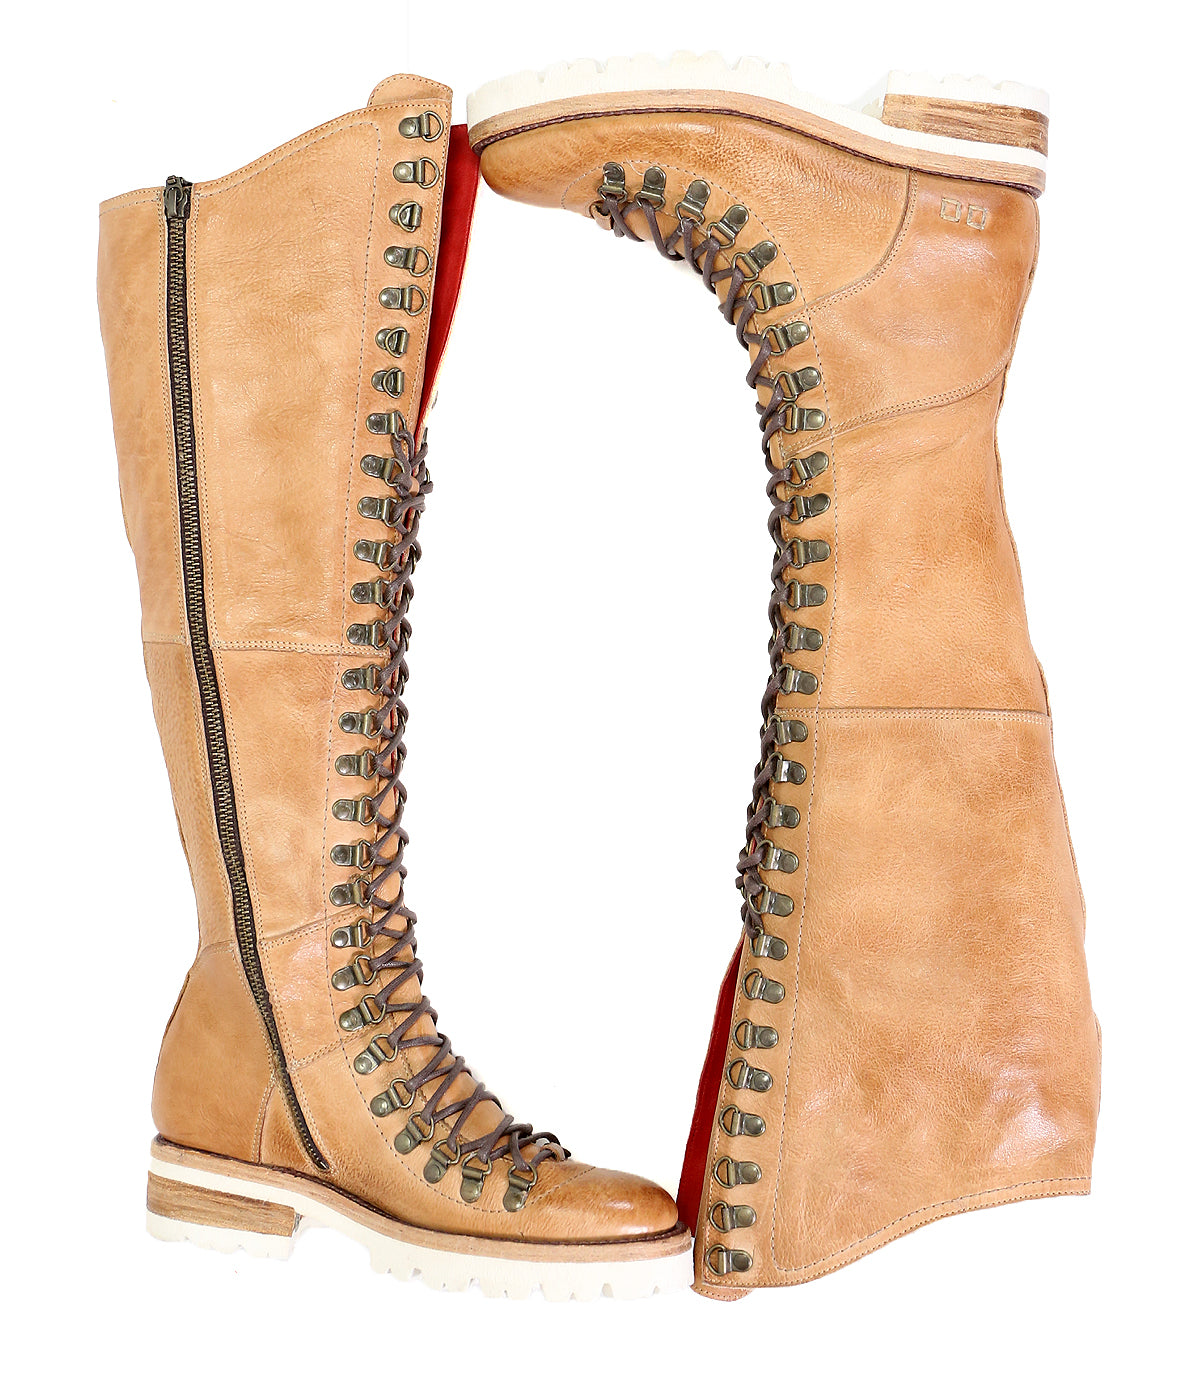 A pair of Lustrous tan leather knee-high hiker-style boots with laces and side zippers, displayed upright against a white background by Bed Stu.